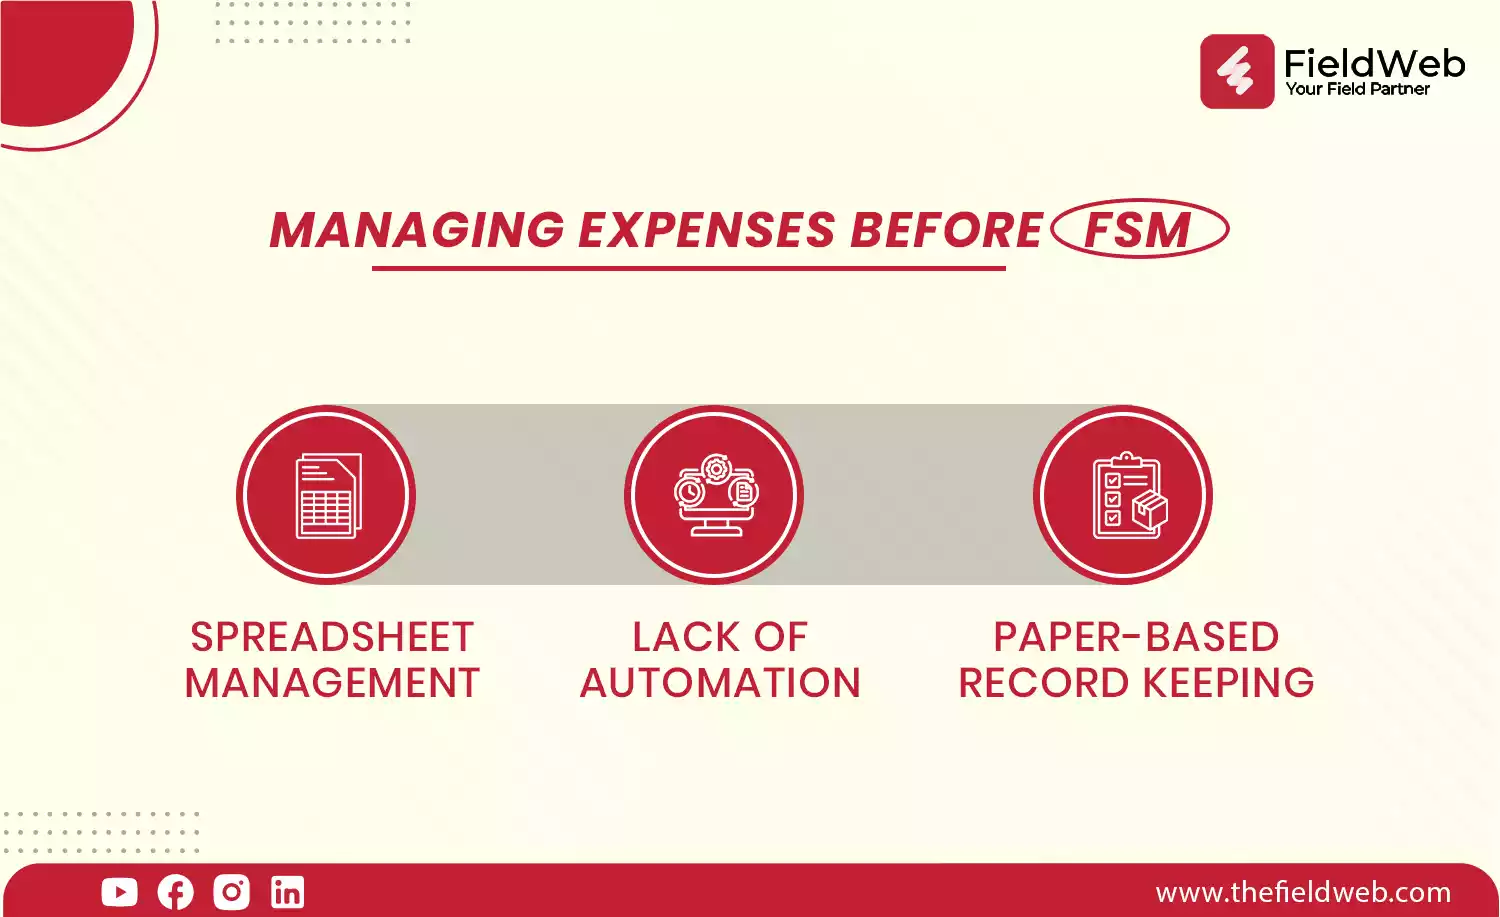 image is displaying expense management without FSM